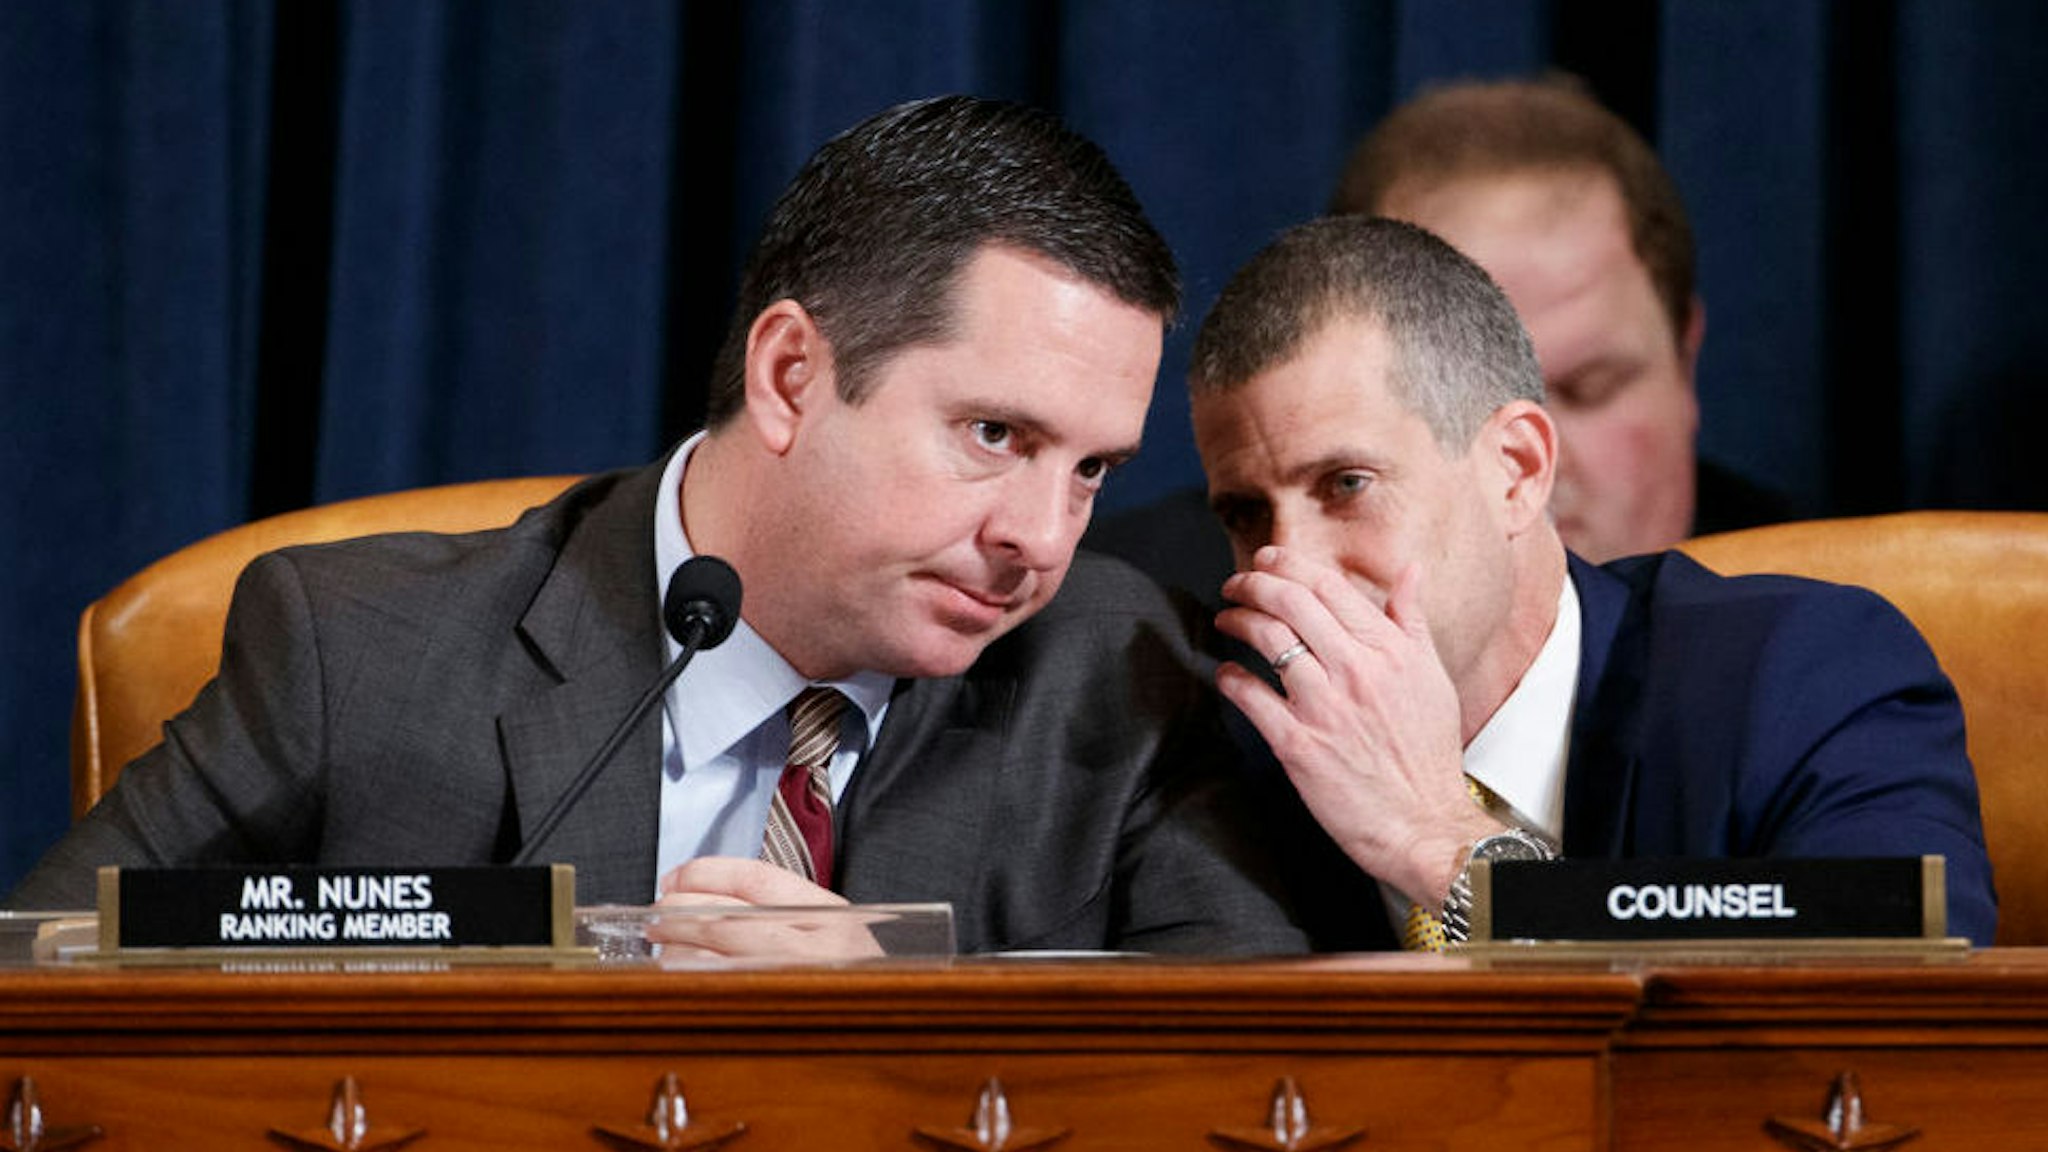 Ranking member of the House Permanent Select Committee on Intelligence Devin Nunes (L) talks with minority legal counsel Steve Castor (R) during the House Permanent Select Committee on Intelligence public hearing on the impeachment inquiry into US President Donald J. Trump, on Capitol Hill in Washington, DC, USA, 19 November 2019. The impeachment inquiry is being led by three congressional committees and was launched following a whistleblower's complaint that alleges US President Donald J. Trump requested help from the President of Ukraine to investigate a political rival, Joe Biden and his son Hunter Biden.